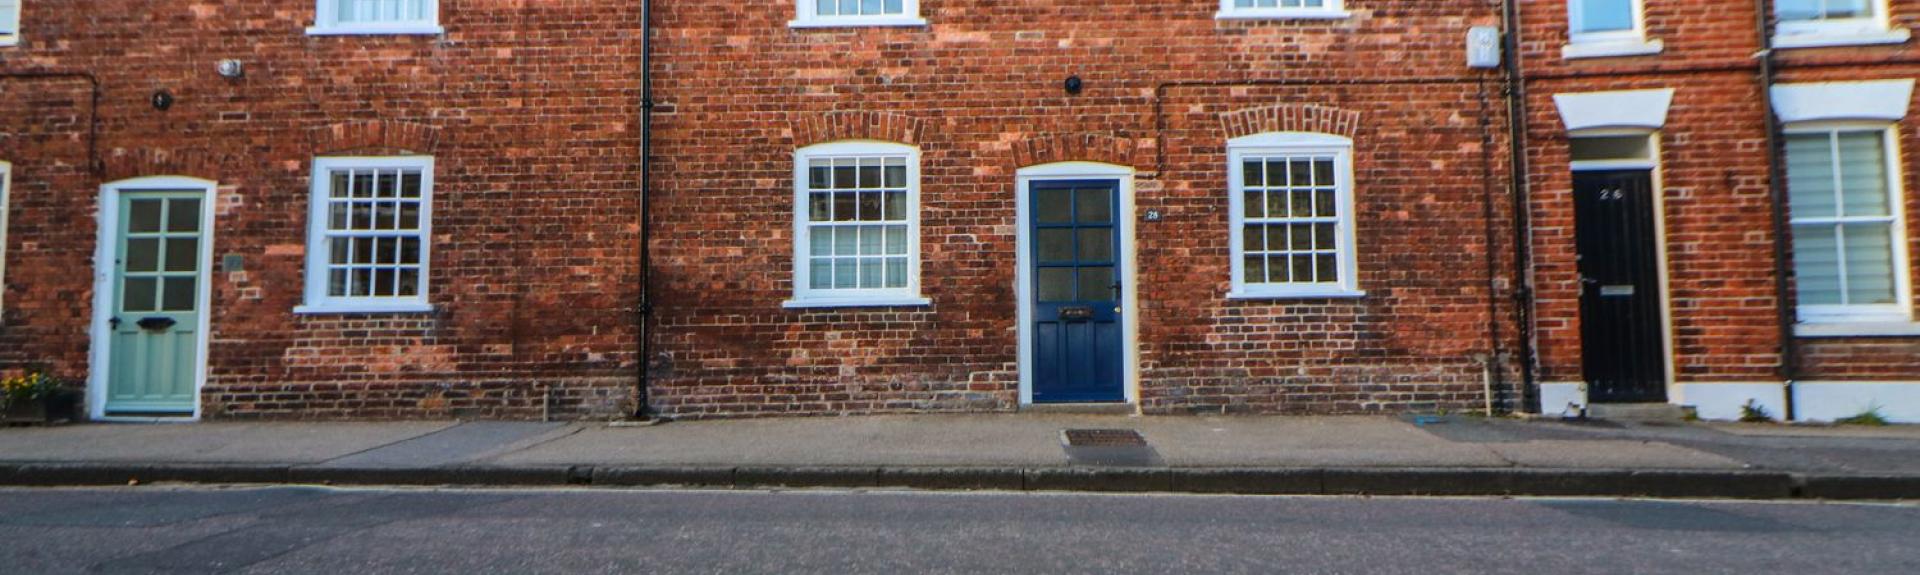 Q double-fronted, redbrick terraced holiday cottage in Wareham.